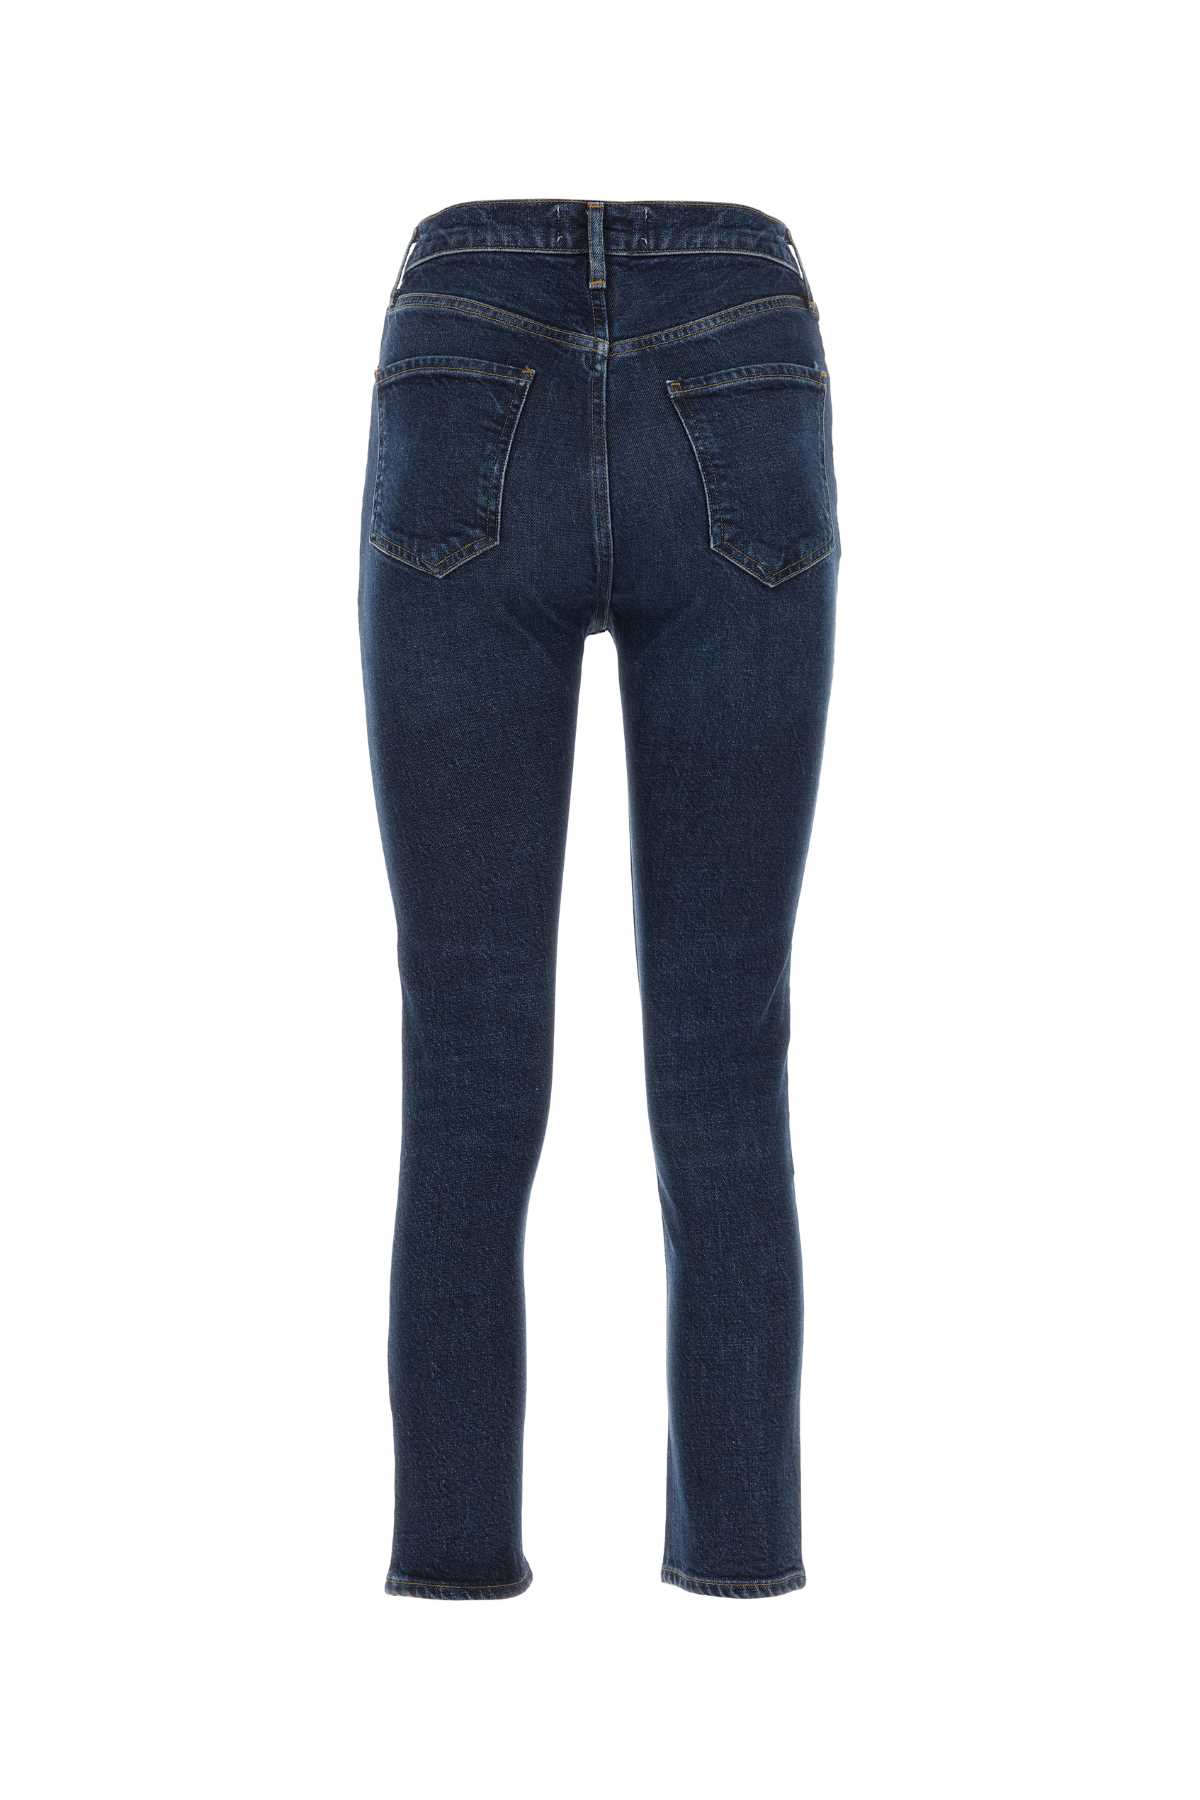 Agolde Stretch Denim Jeans In Dded